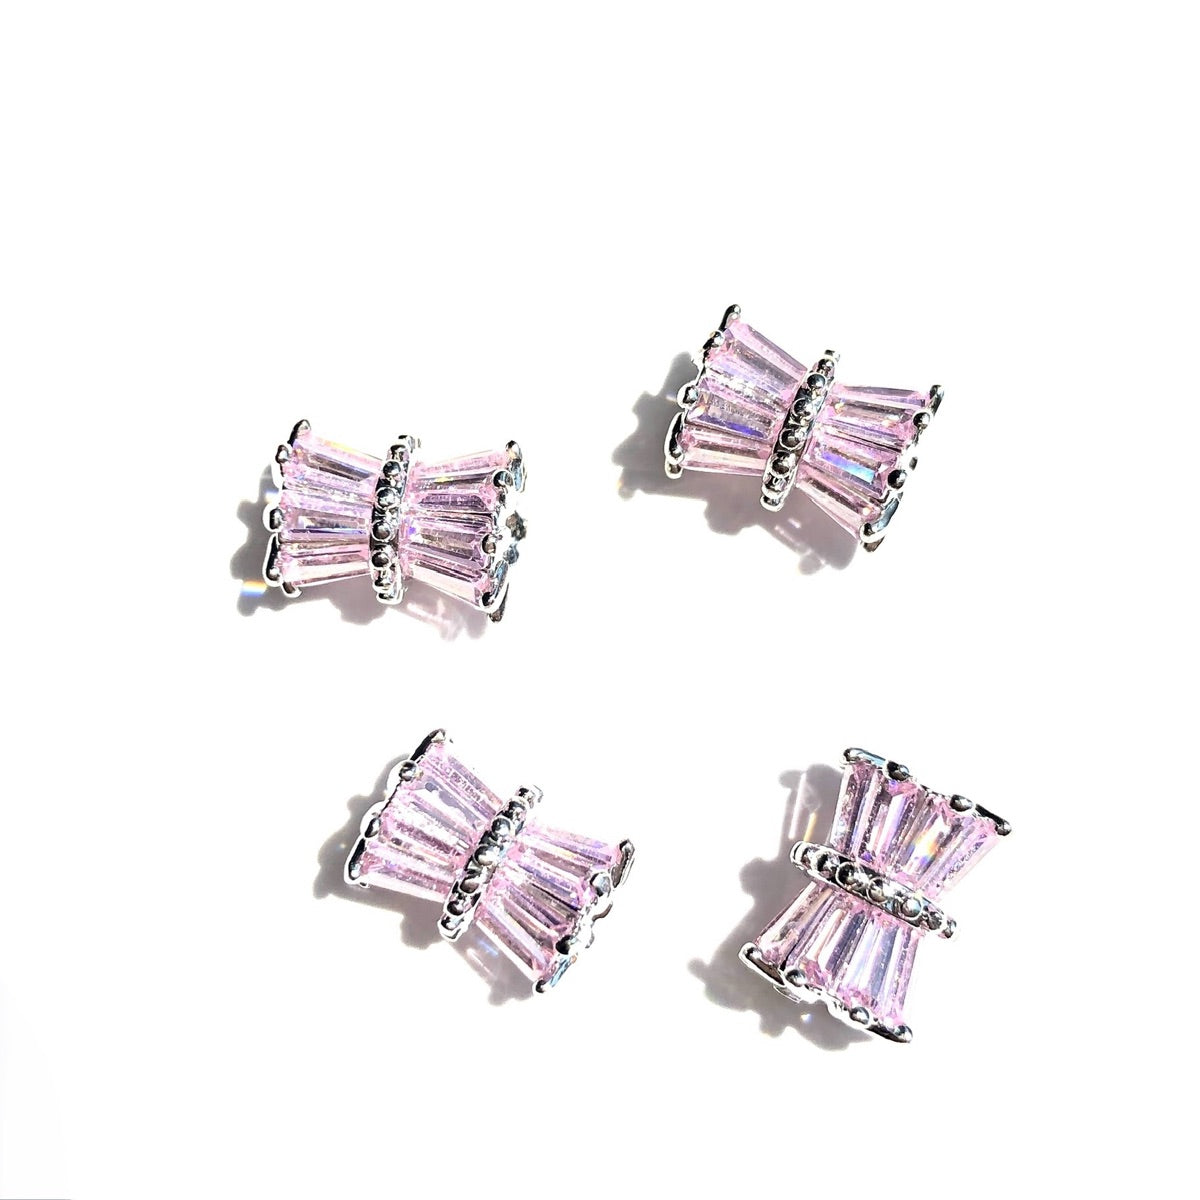 10-20-50pcs/lot Pink CZ Paved Hourglass Spacers Silver CZ Paved Spacers Hourglass Beads New Spacers Arrivals Wholesale Charms Beads Beyond